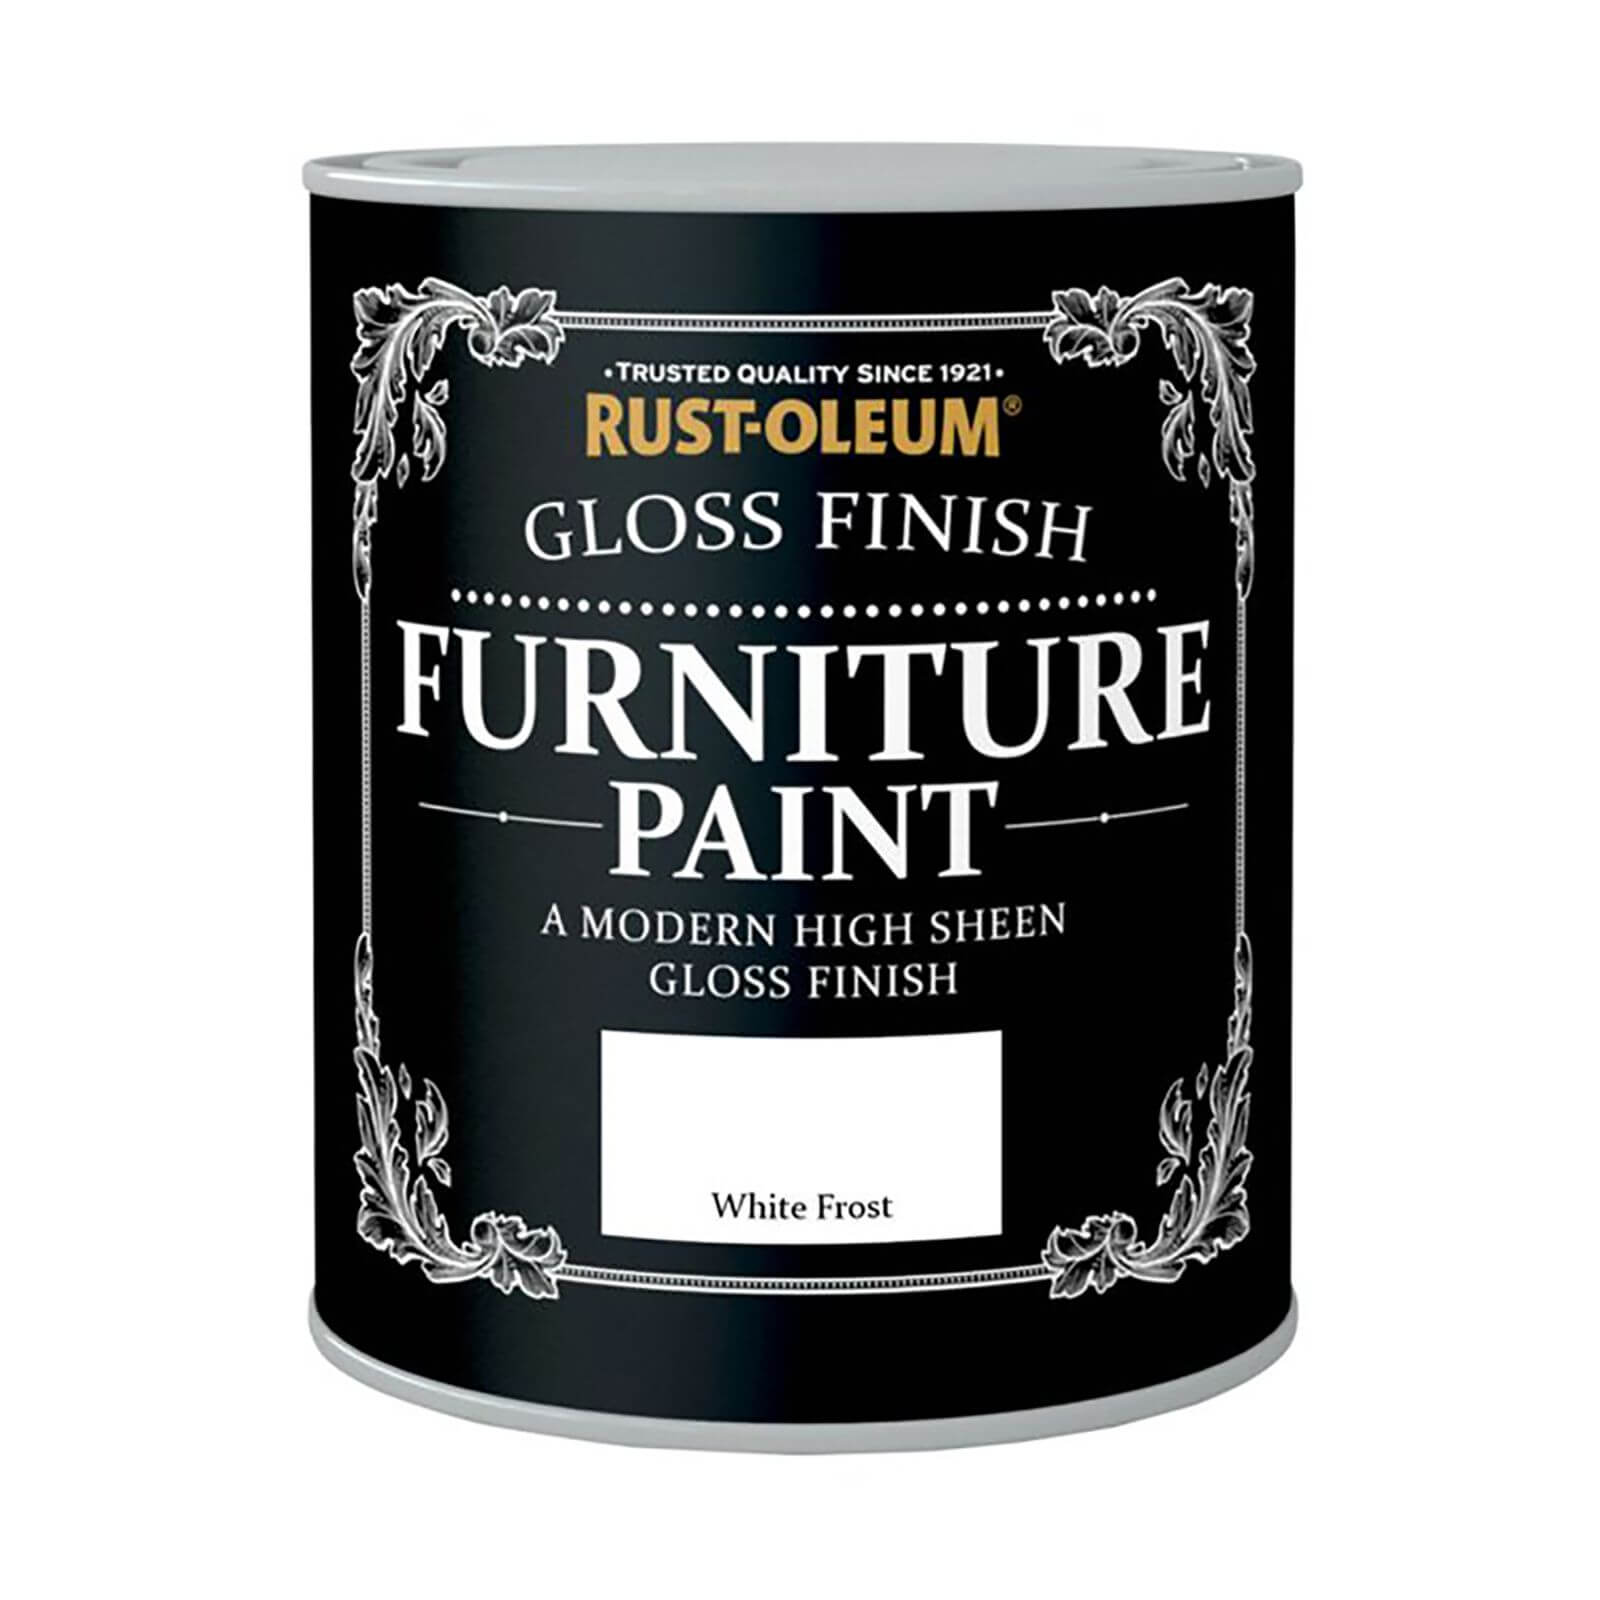 Rust-Oleum Gloss Furniture Paint White Frost - 125ml